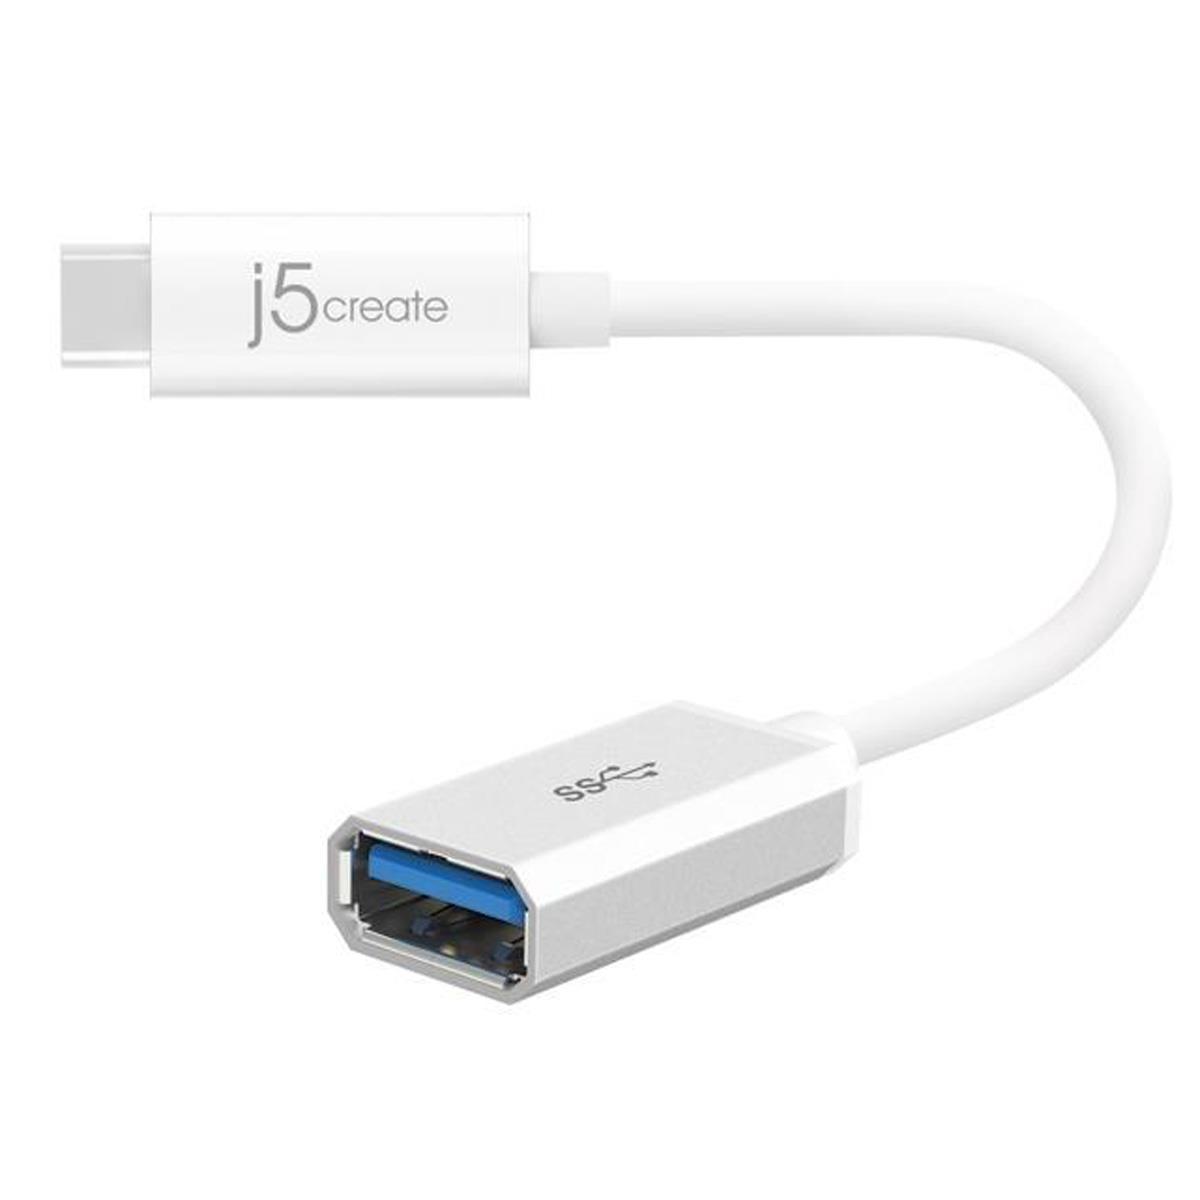 Image of J5 Create USB 3.1 Type-C to Type-A Adapter